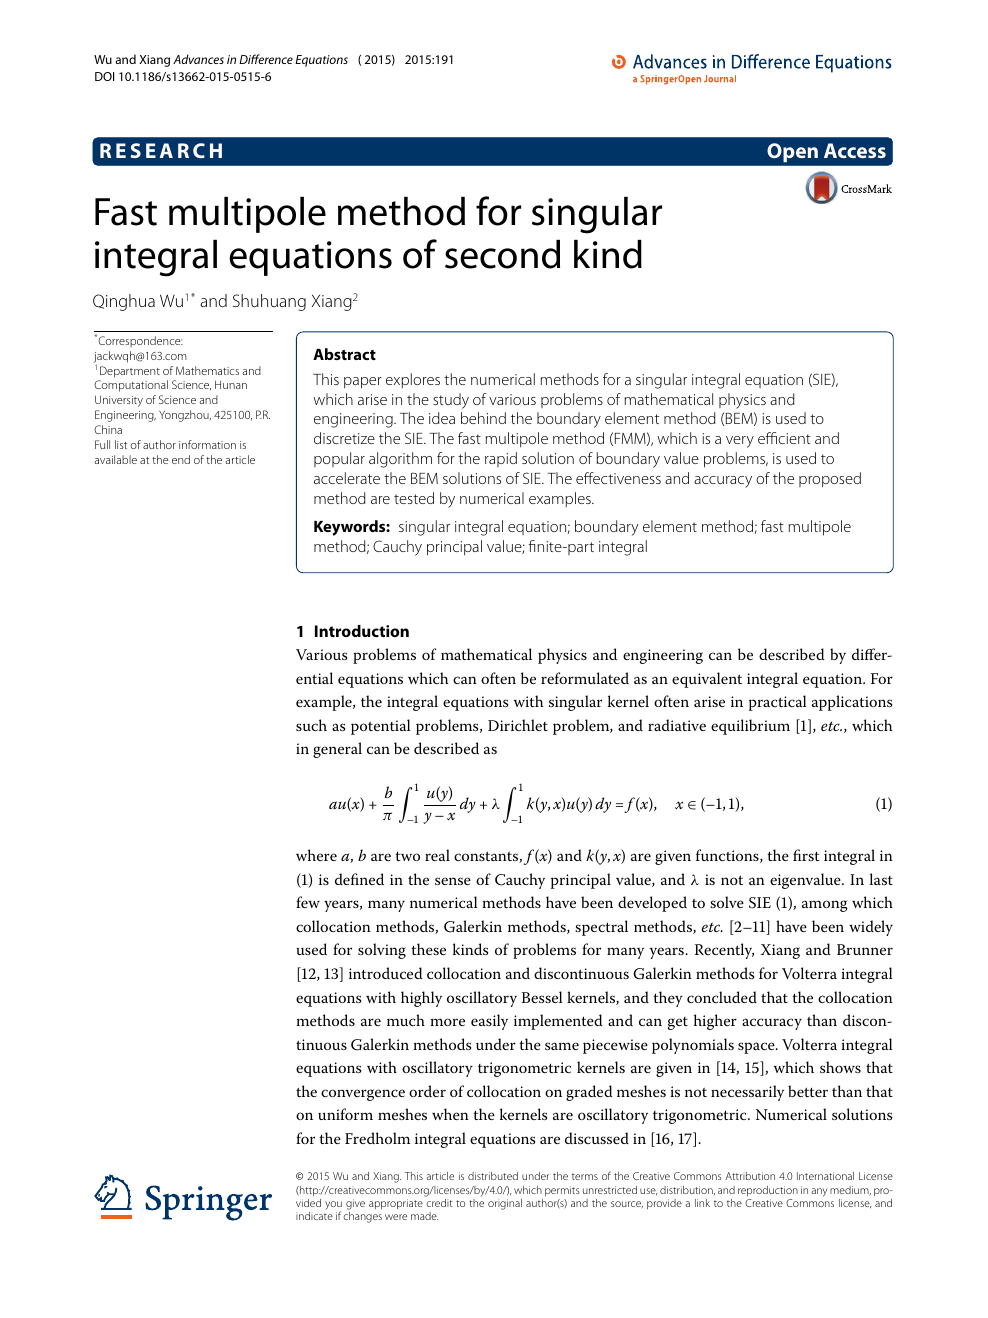 Fast Multipole Method For Singular Integral Equations Of Second Kind Topic Of Research Paper In Mathematics Download Scholarly Article Pdf And Read For Free On Cyberleninka Open Science Hub